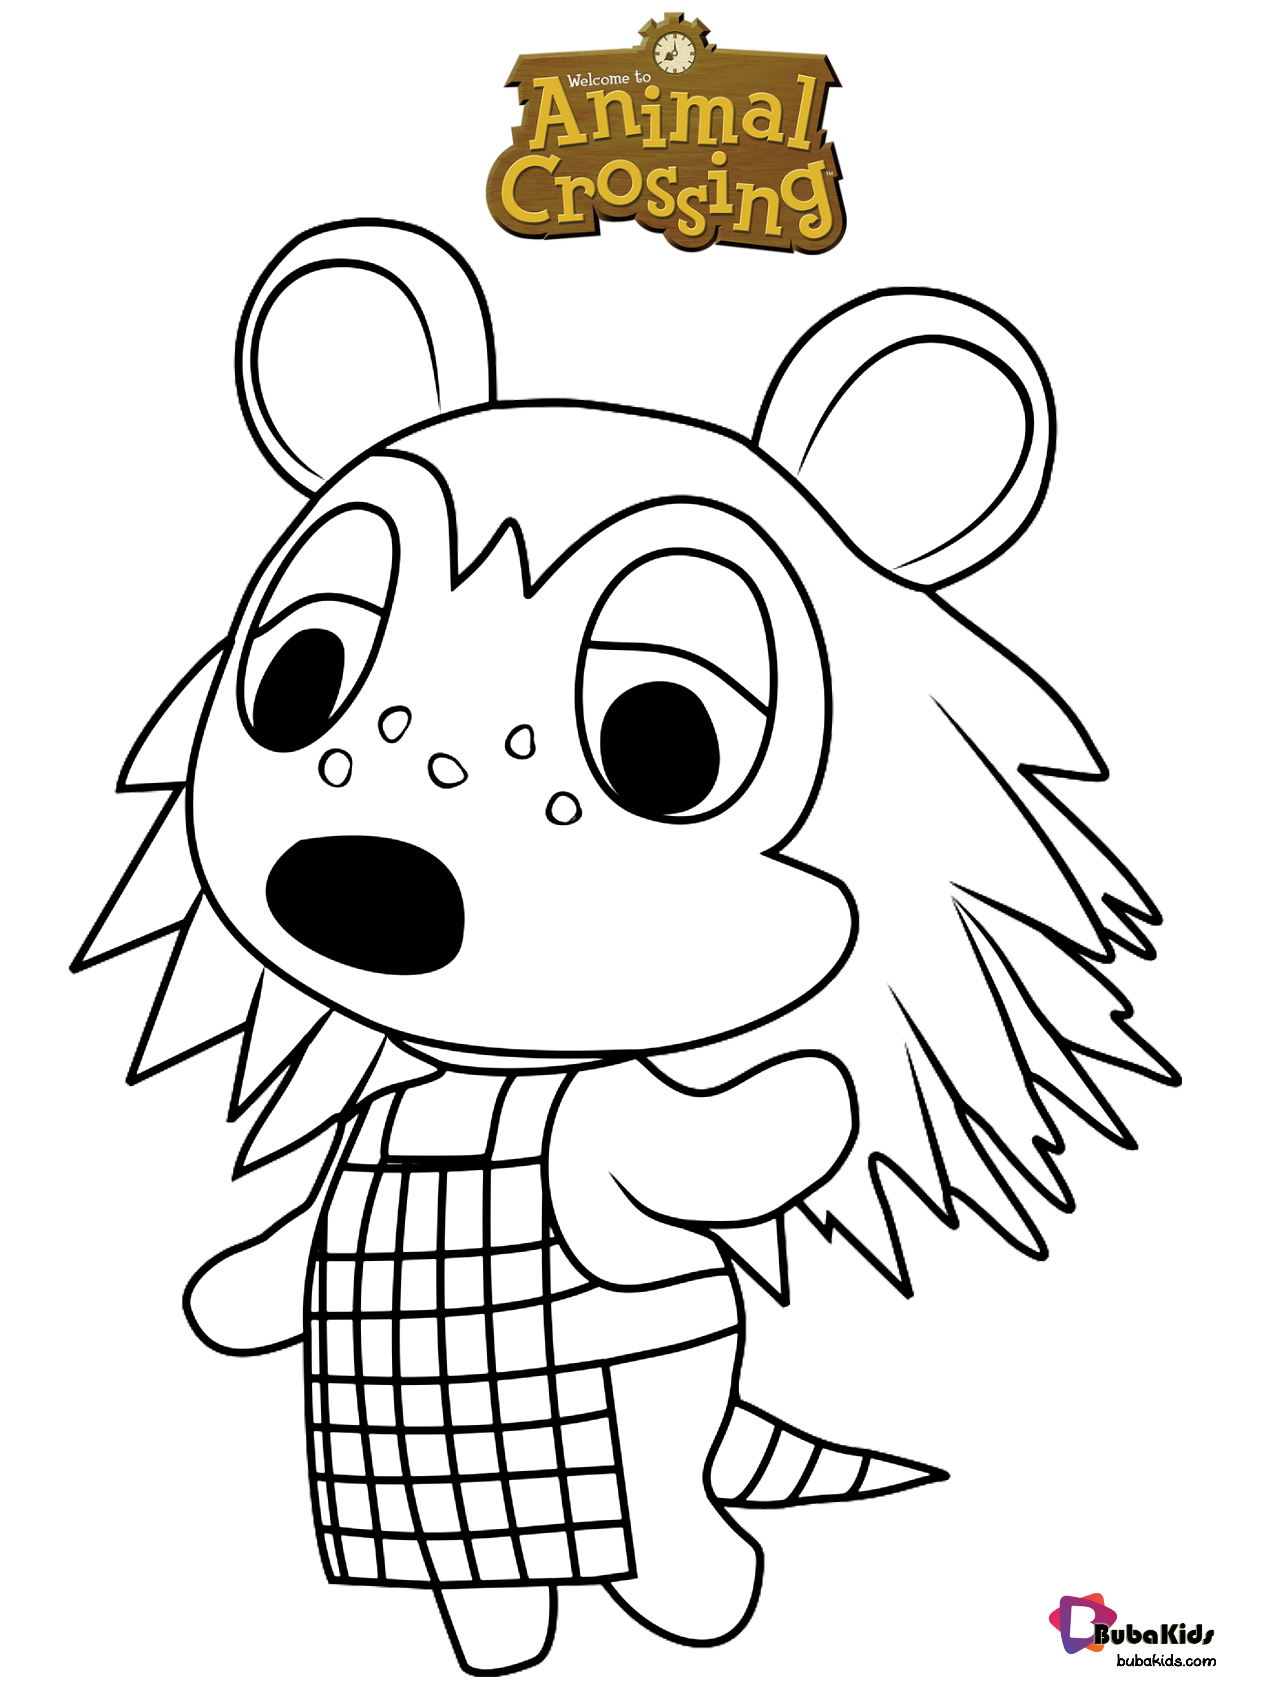 Sable Animal Crossing Coloring Page for kids